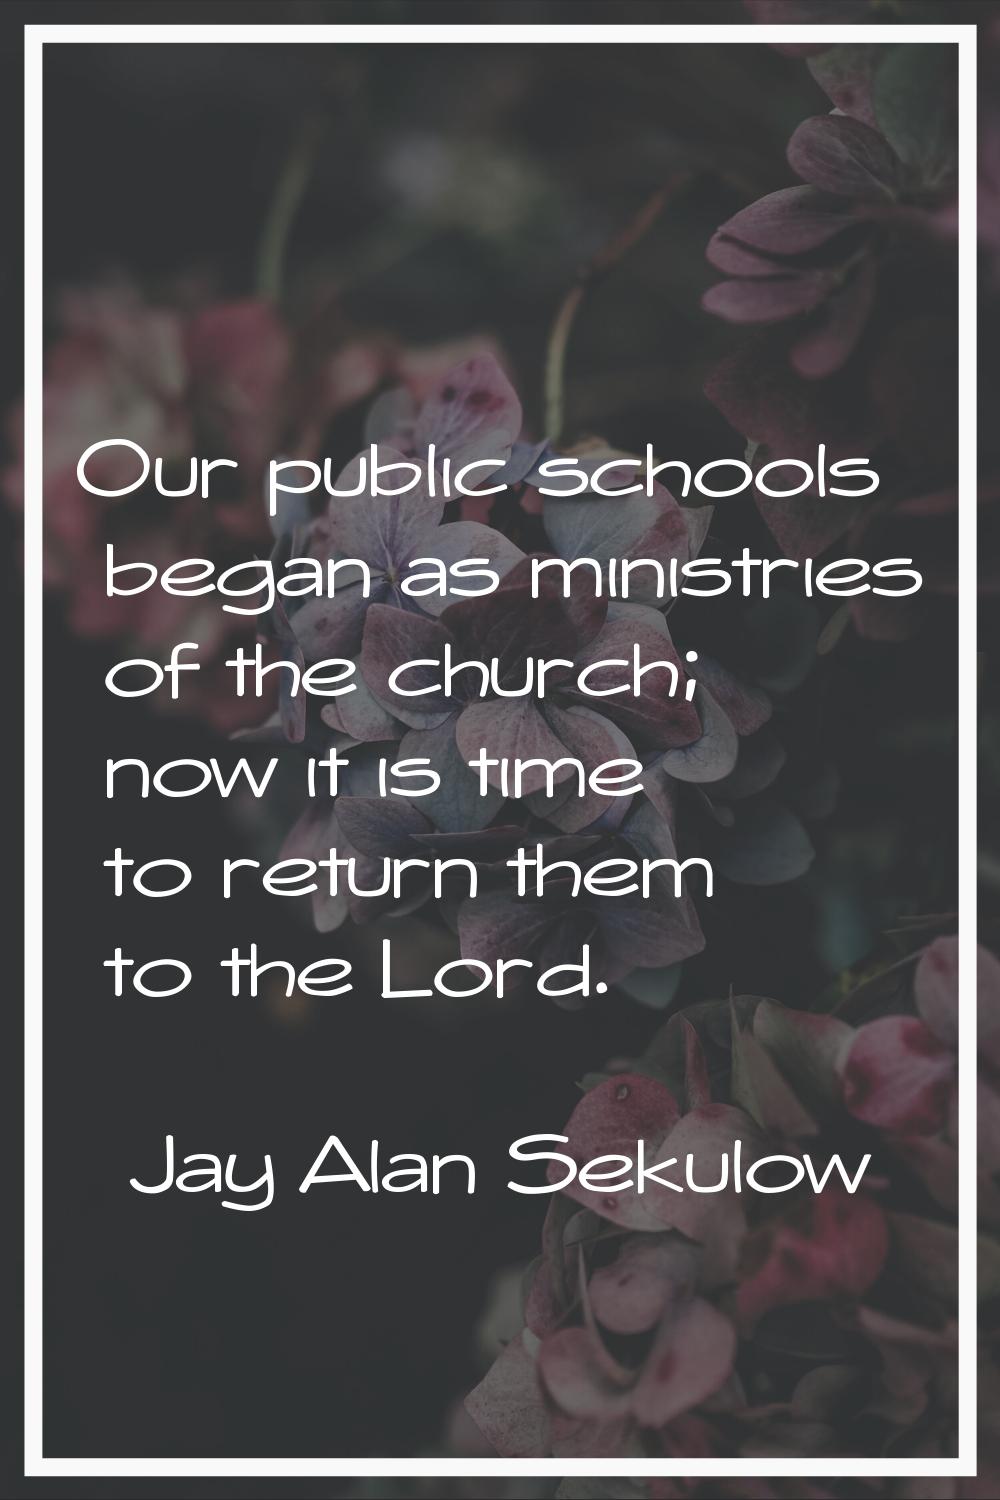 Our public schools began as ministries of the church; now it is time to return them to the Lord.